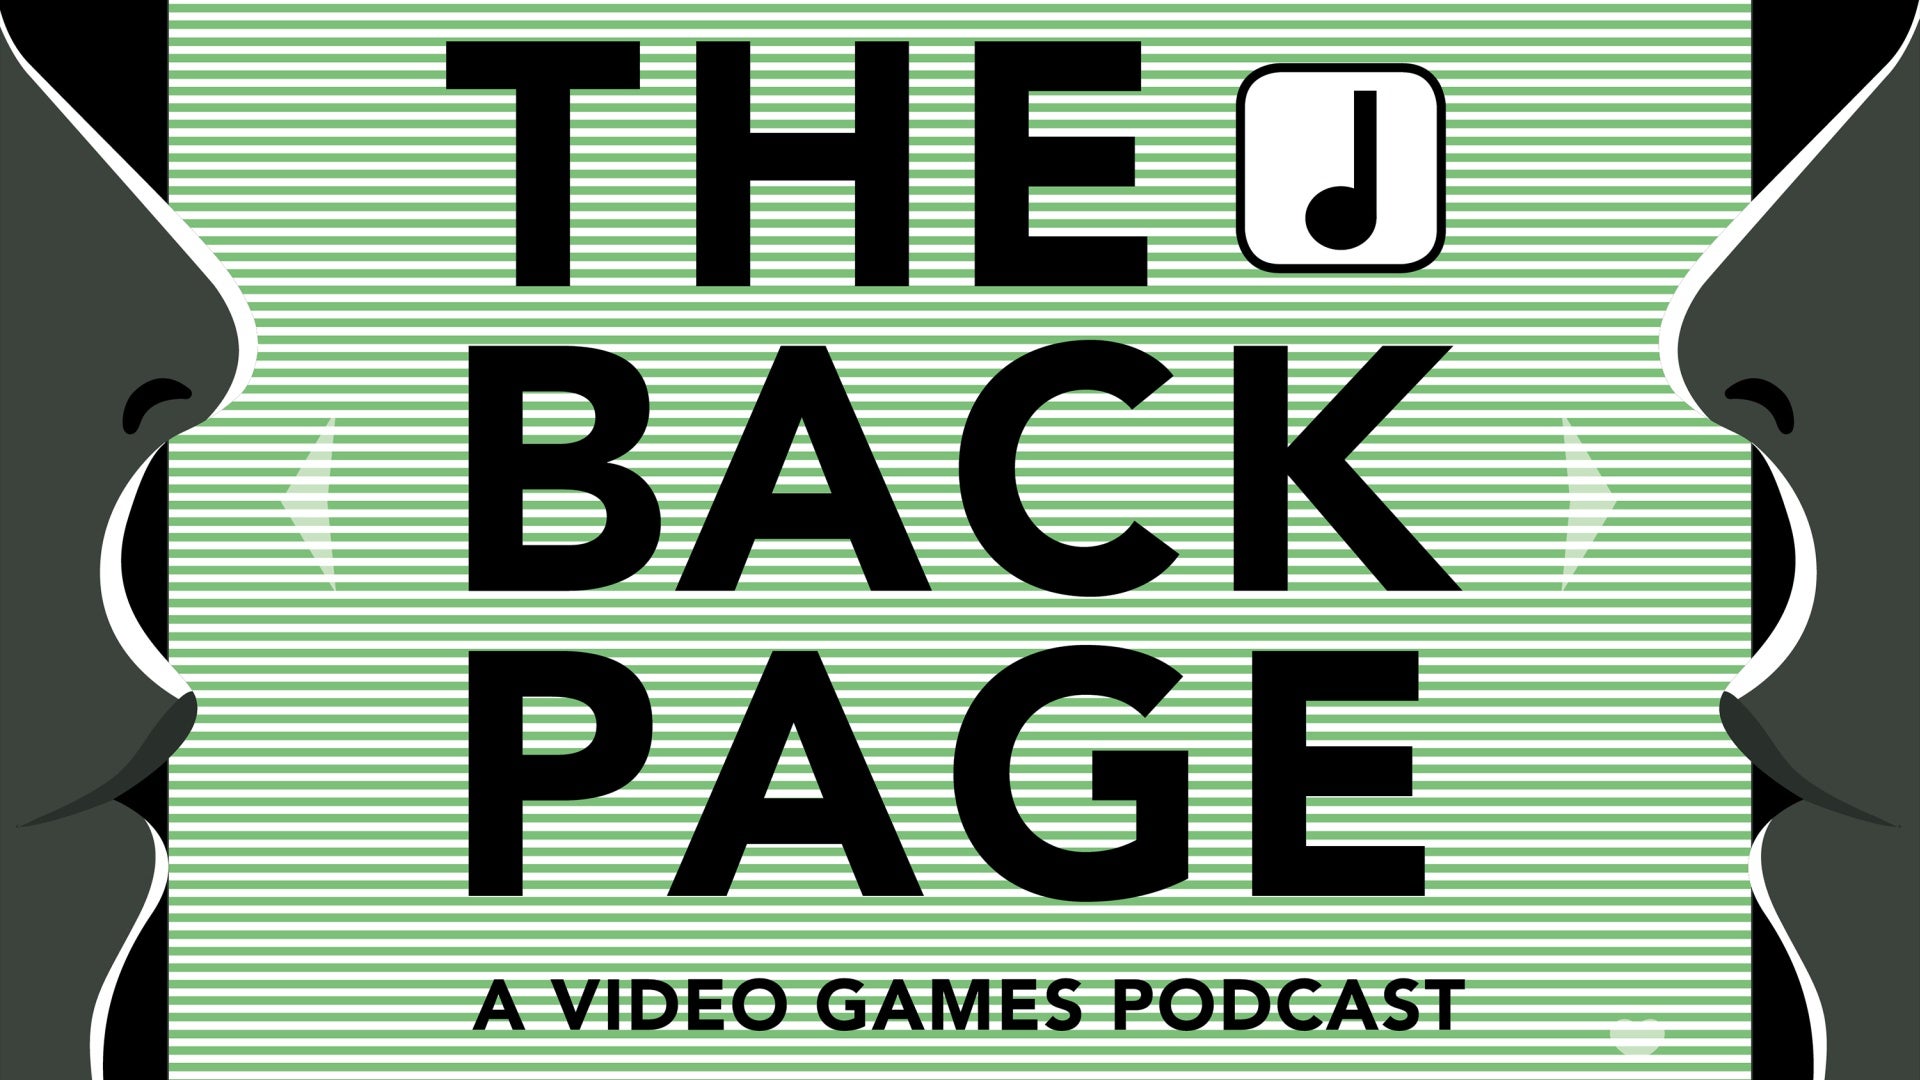 The logo for The Back Page podcast.